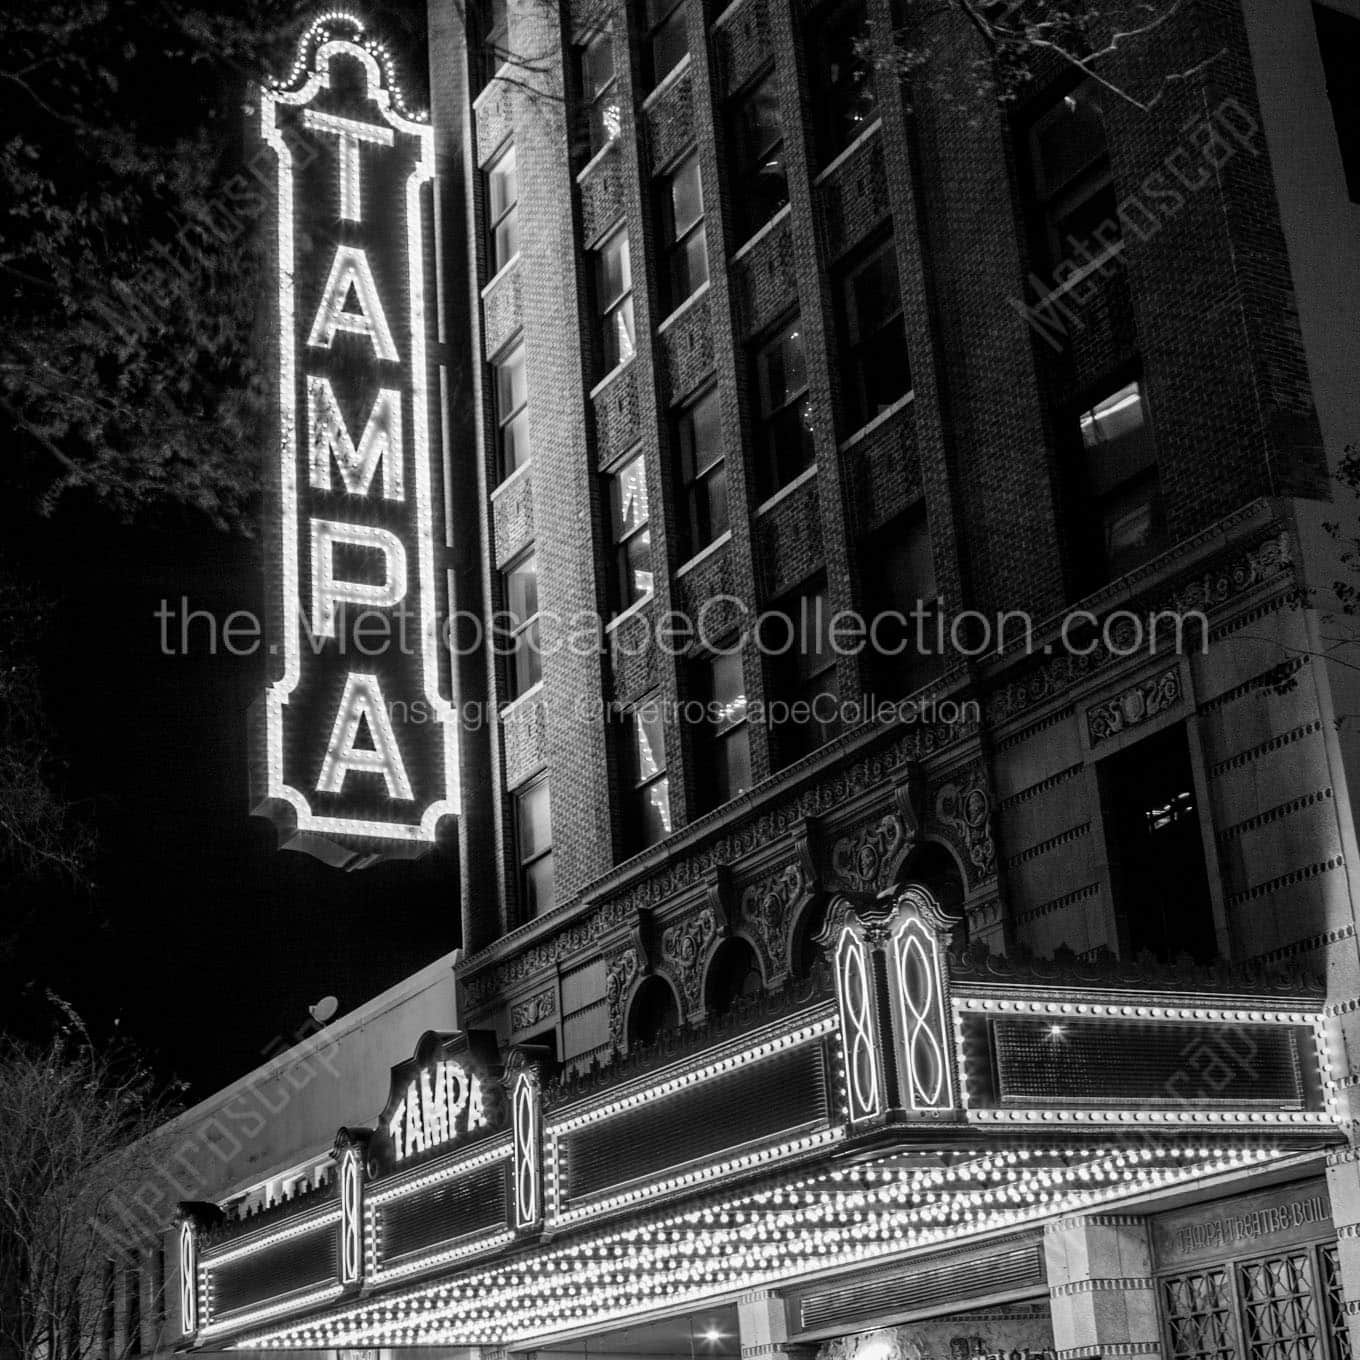 tampa theater sign franklin street Black & White Wall Art